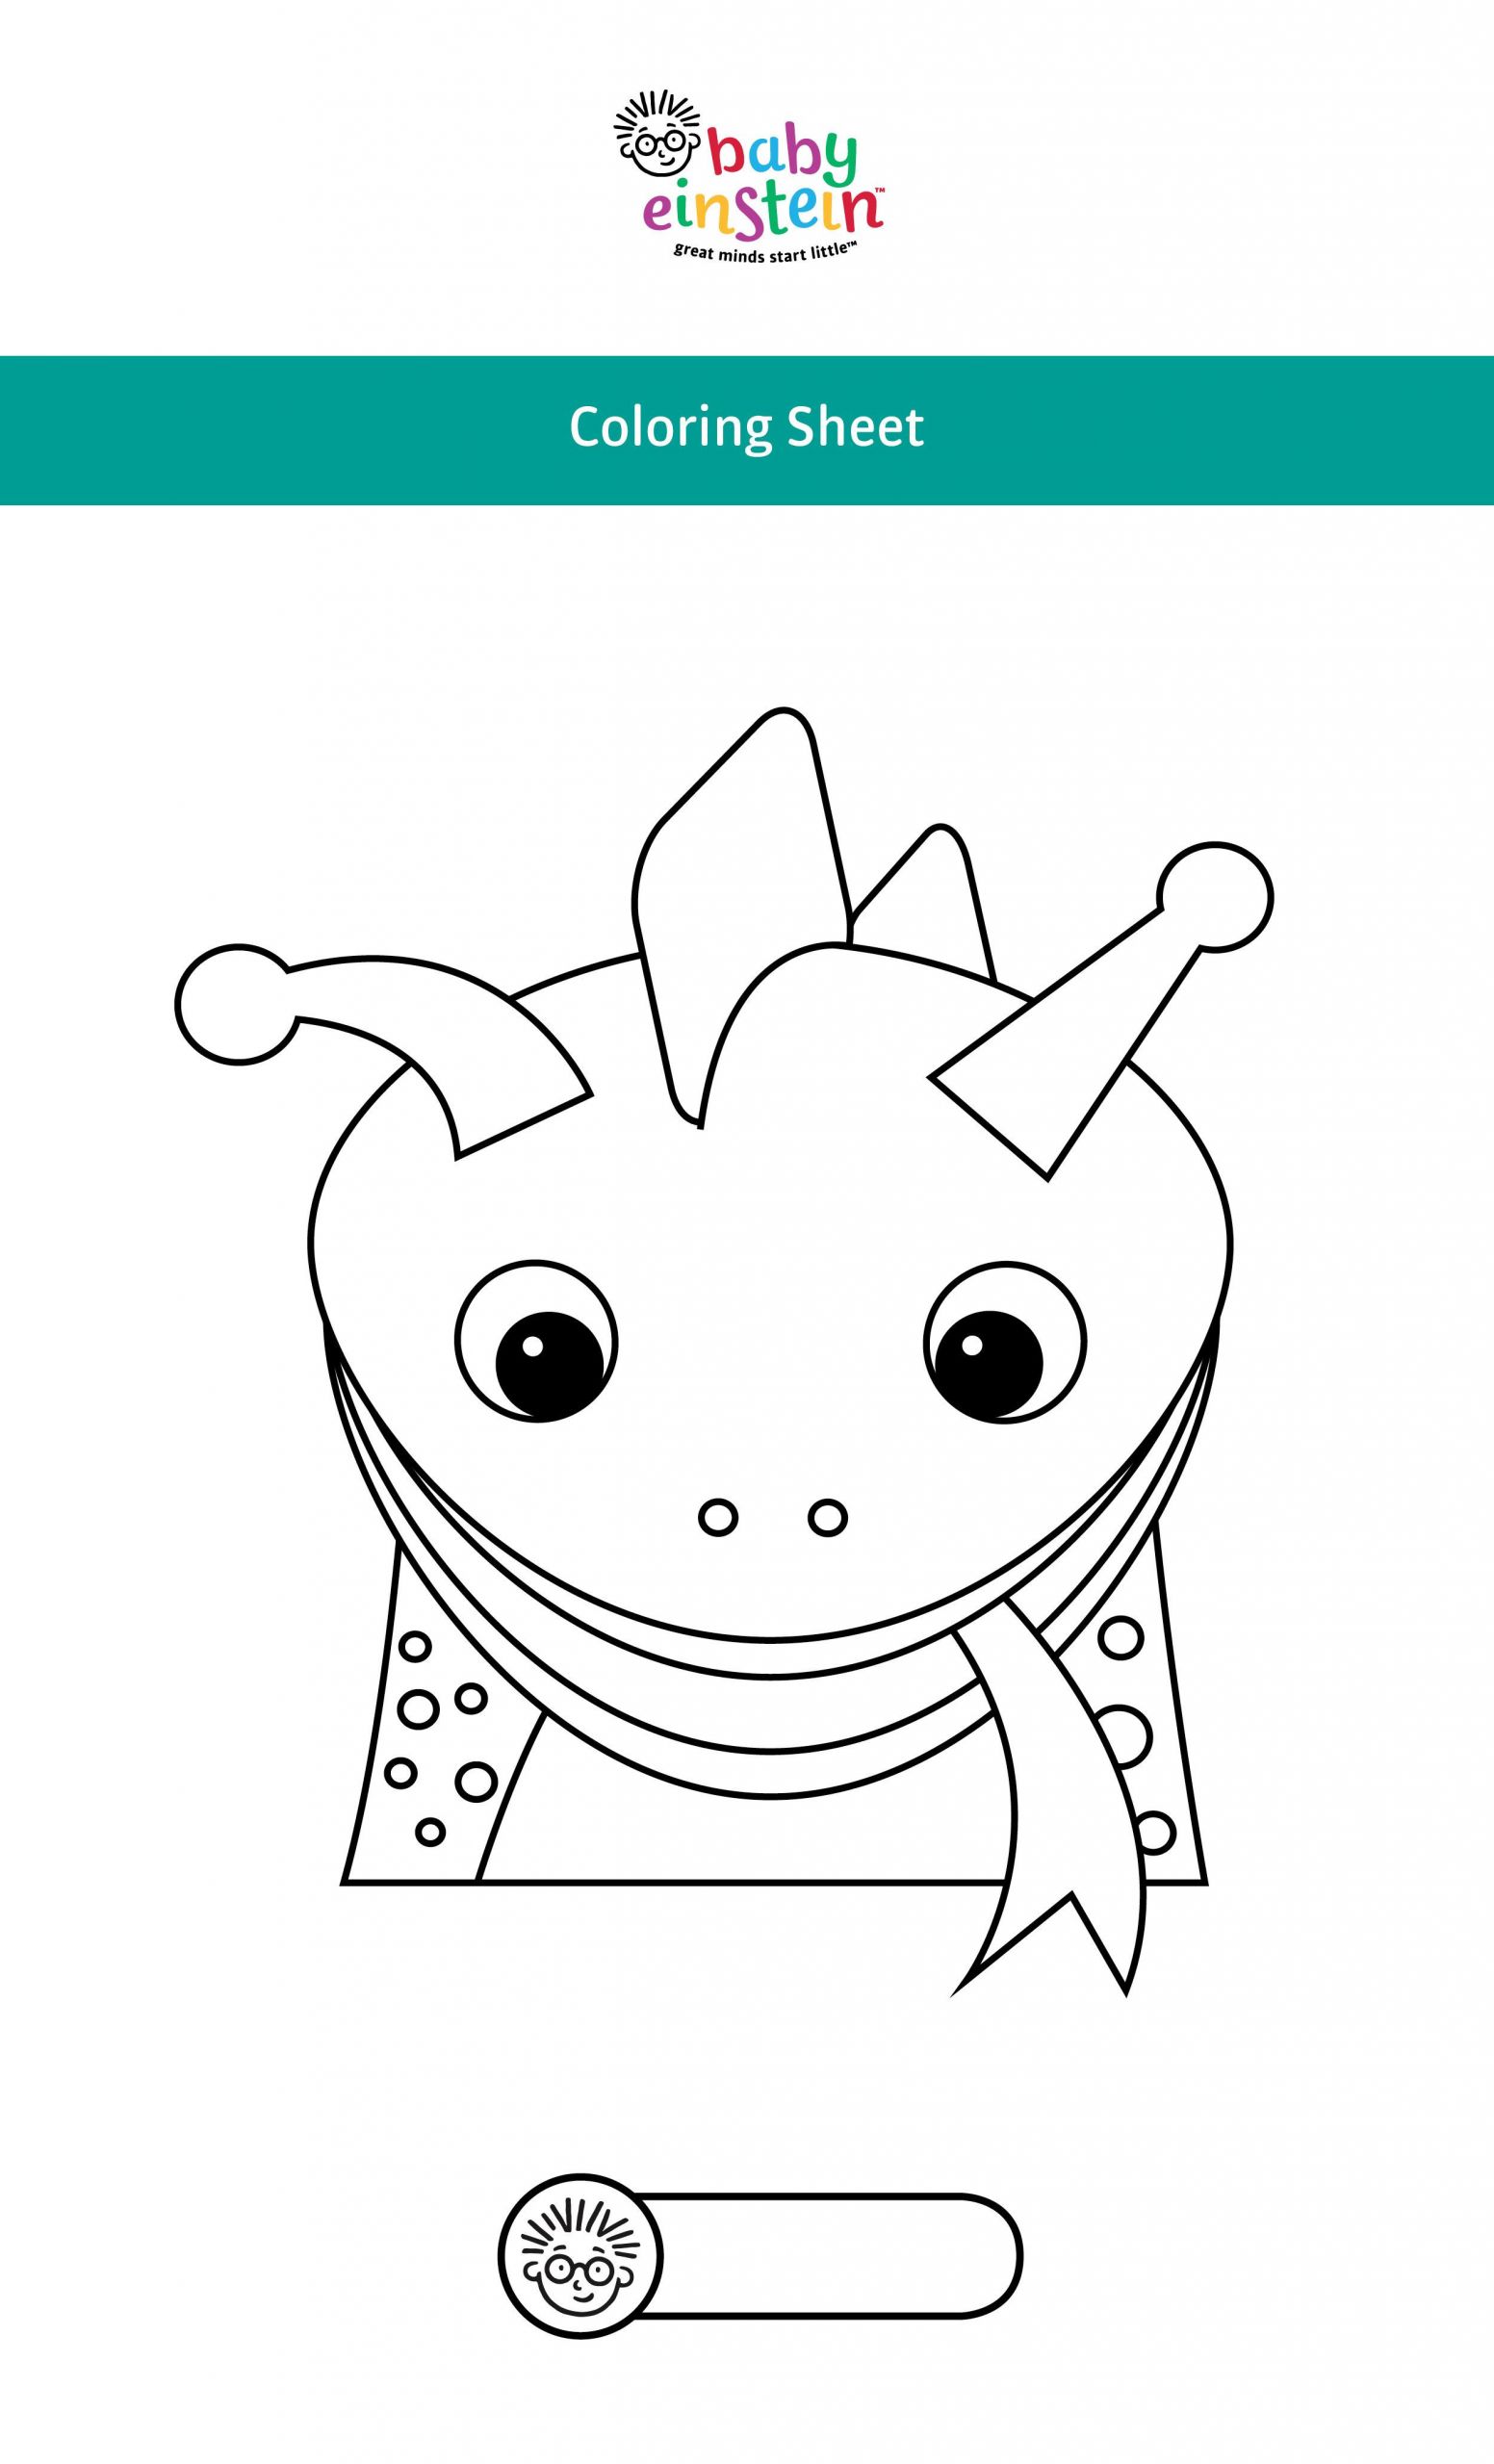 Baby Einstein Coloring Books
 Adorable Baby Einstein coloring pages for your little one